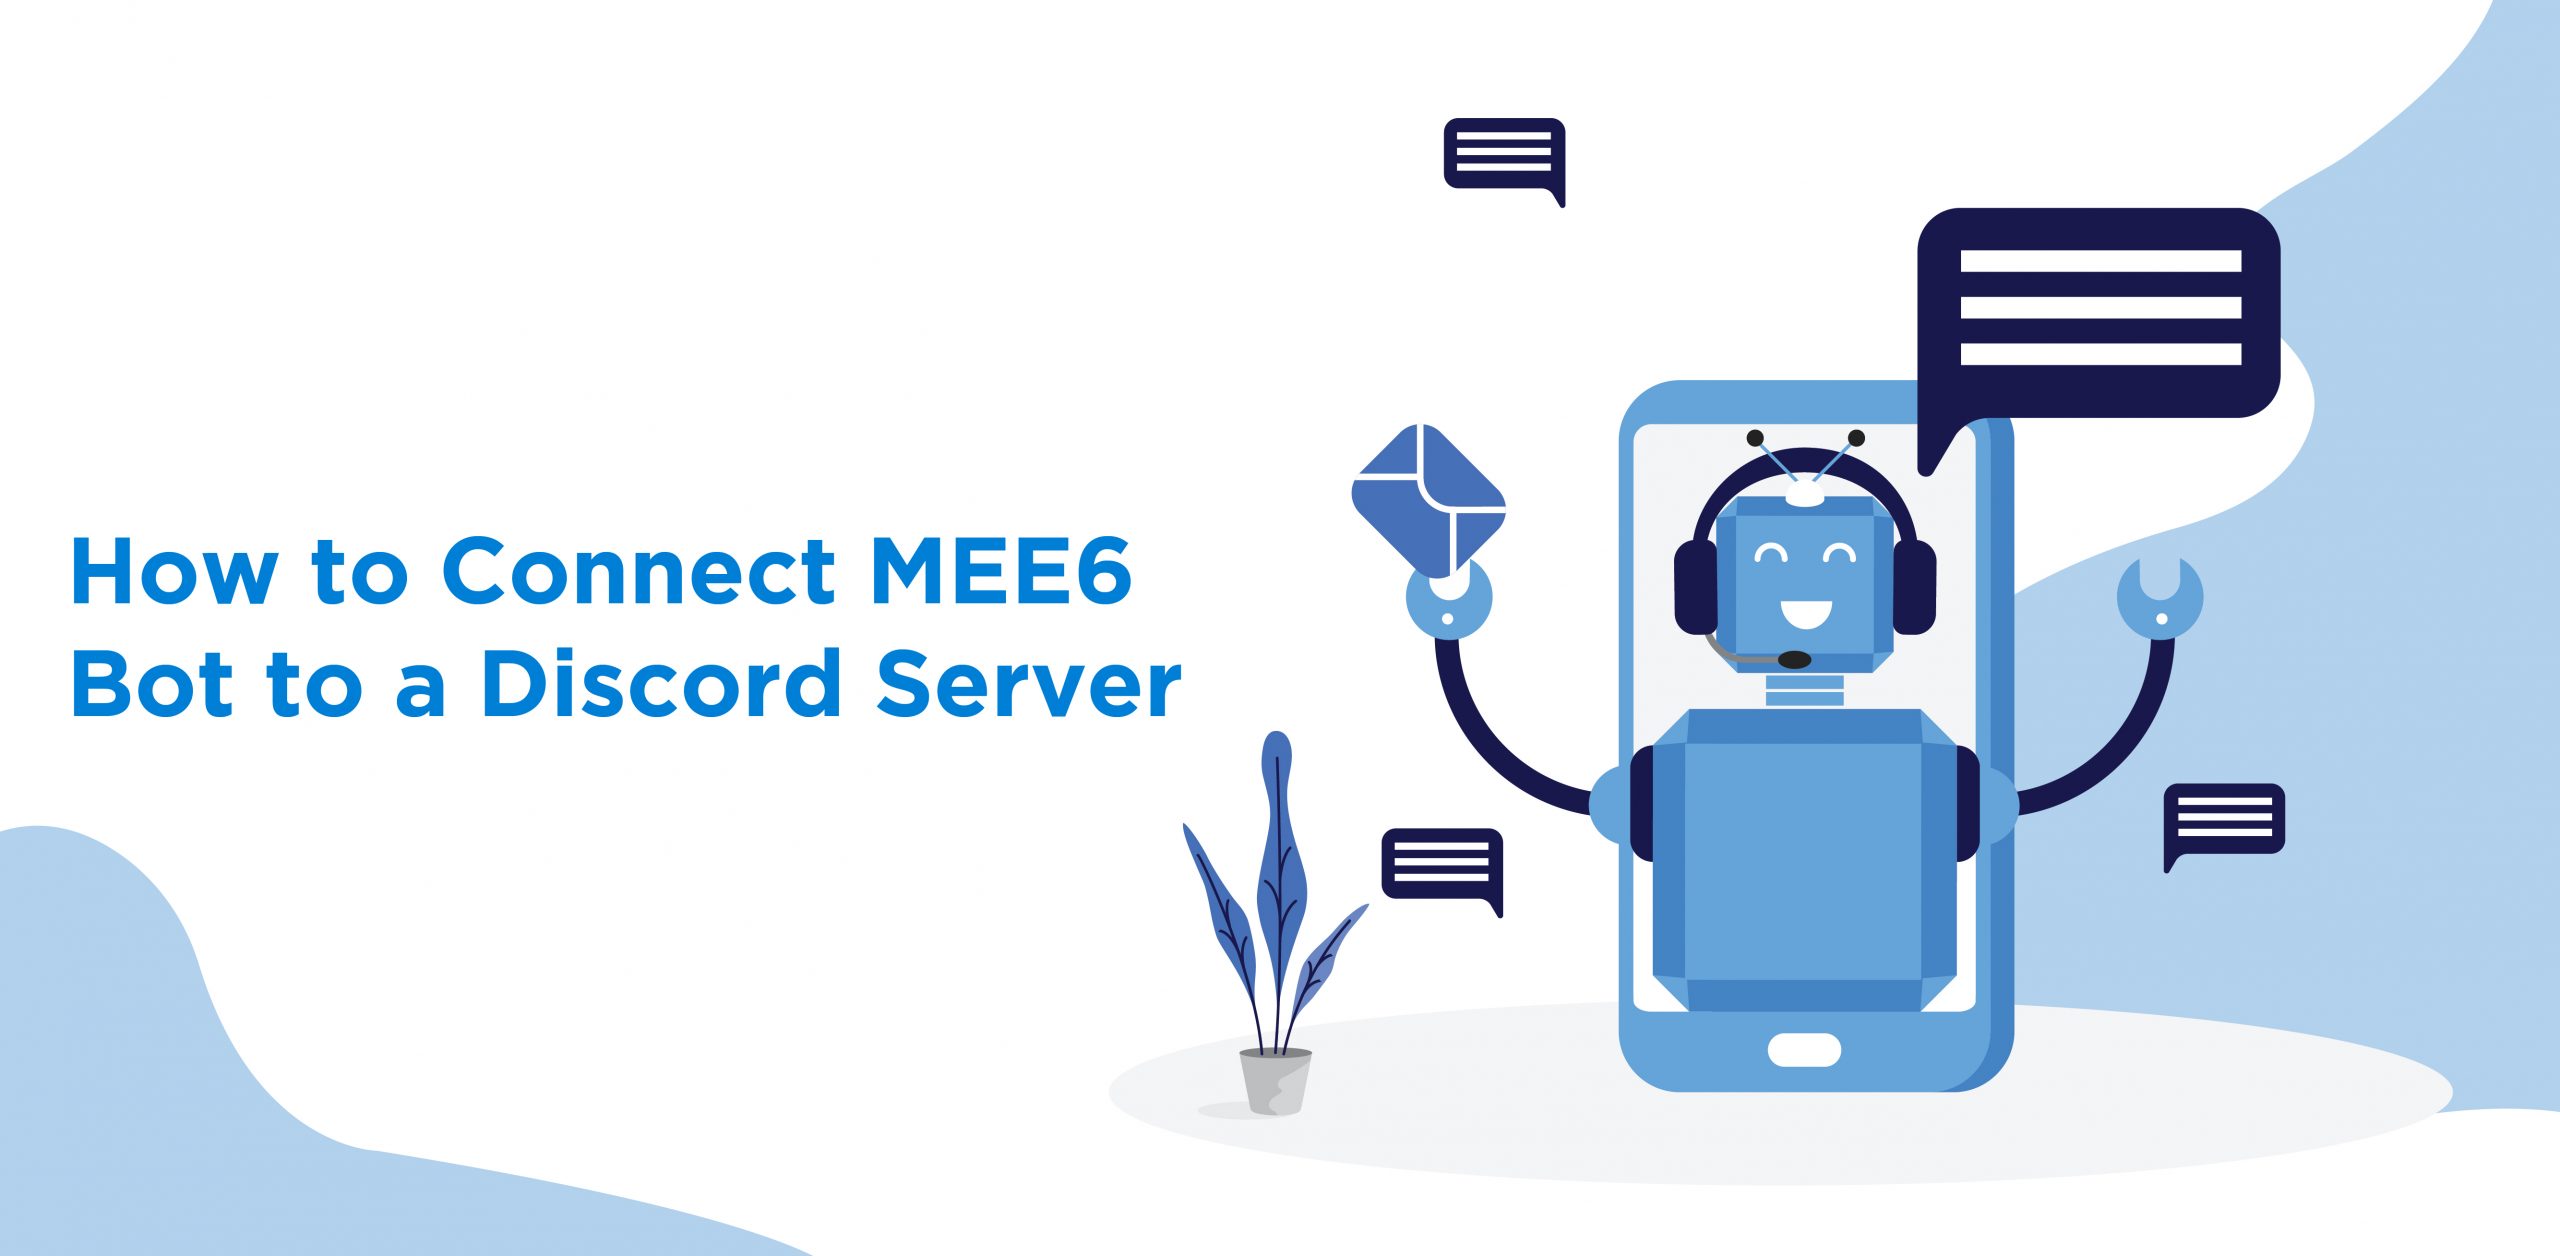 How to Connect MEE6 Bot to a Discord Server